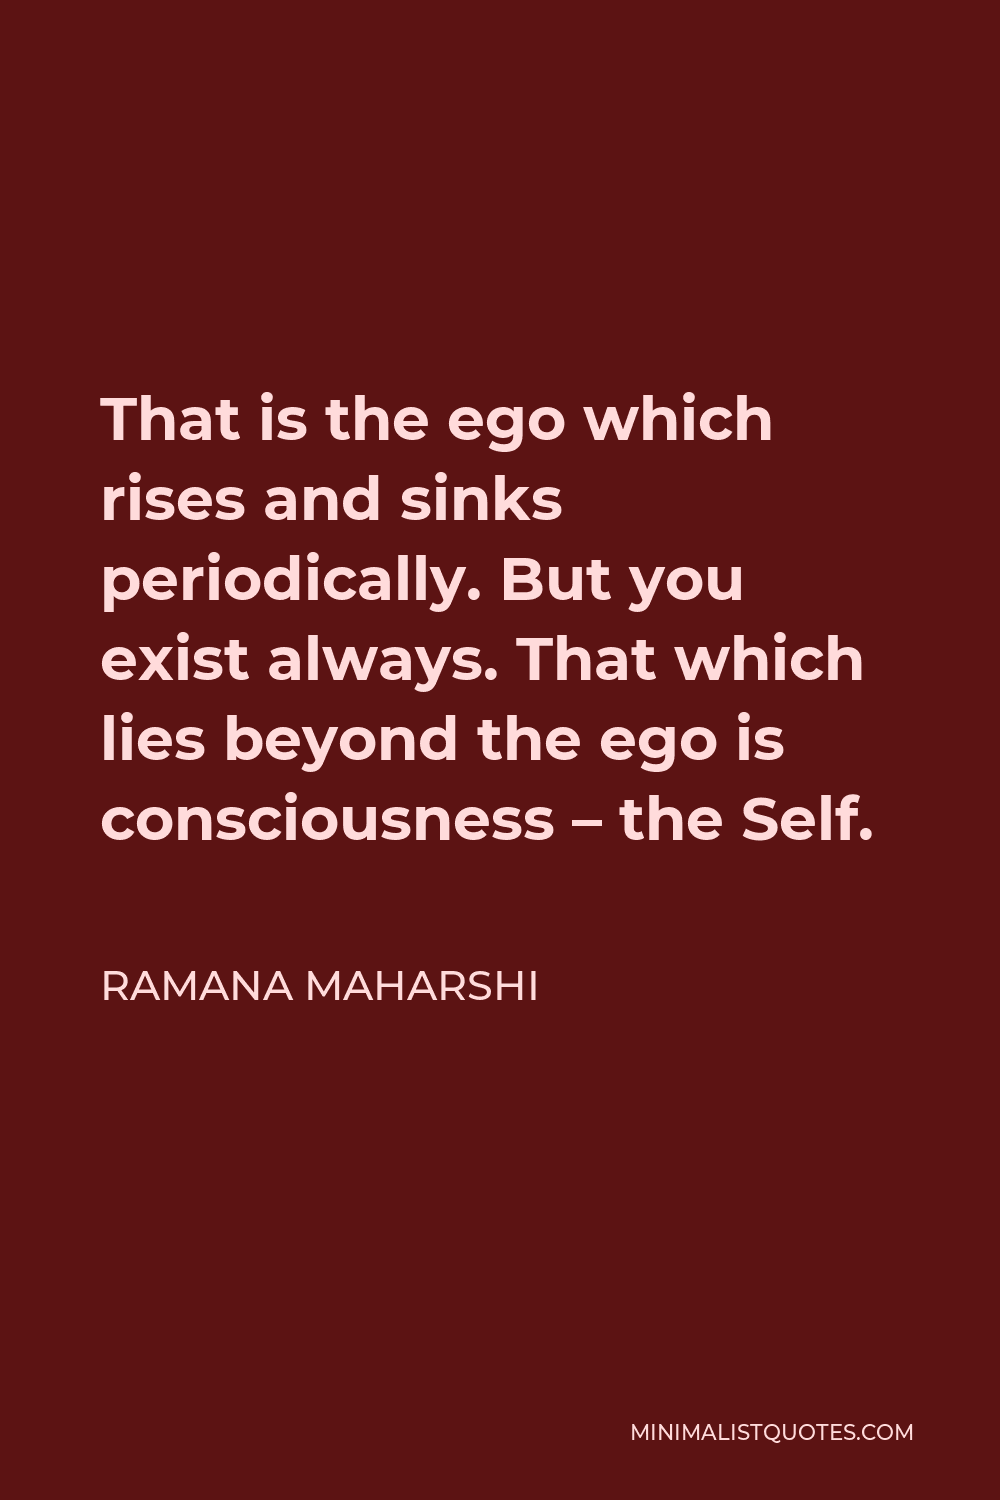 Ramana Maharshi Quote - That is the ego which rises and sinks periodically. But you exist always. That which lies beyond the ego is consciousness – the Self.